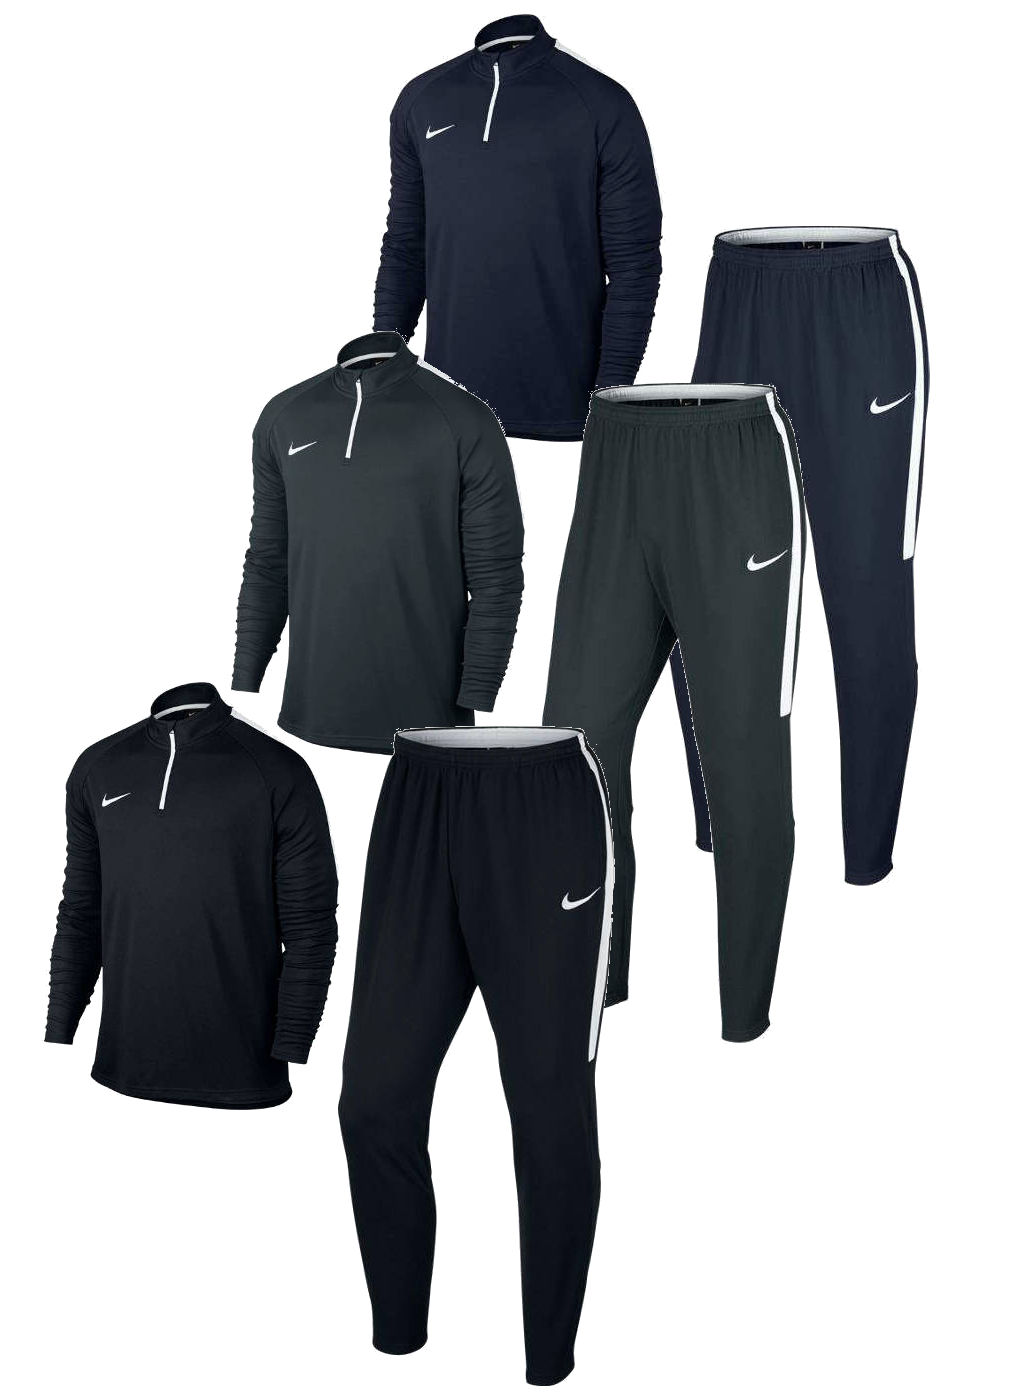 5 Day Nike Workout Half Zip for Weight Loss